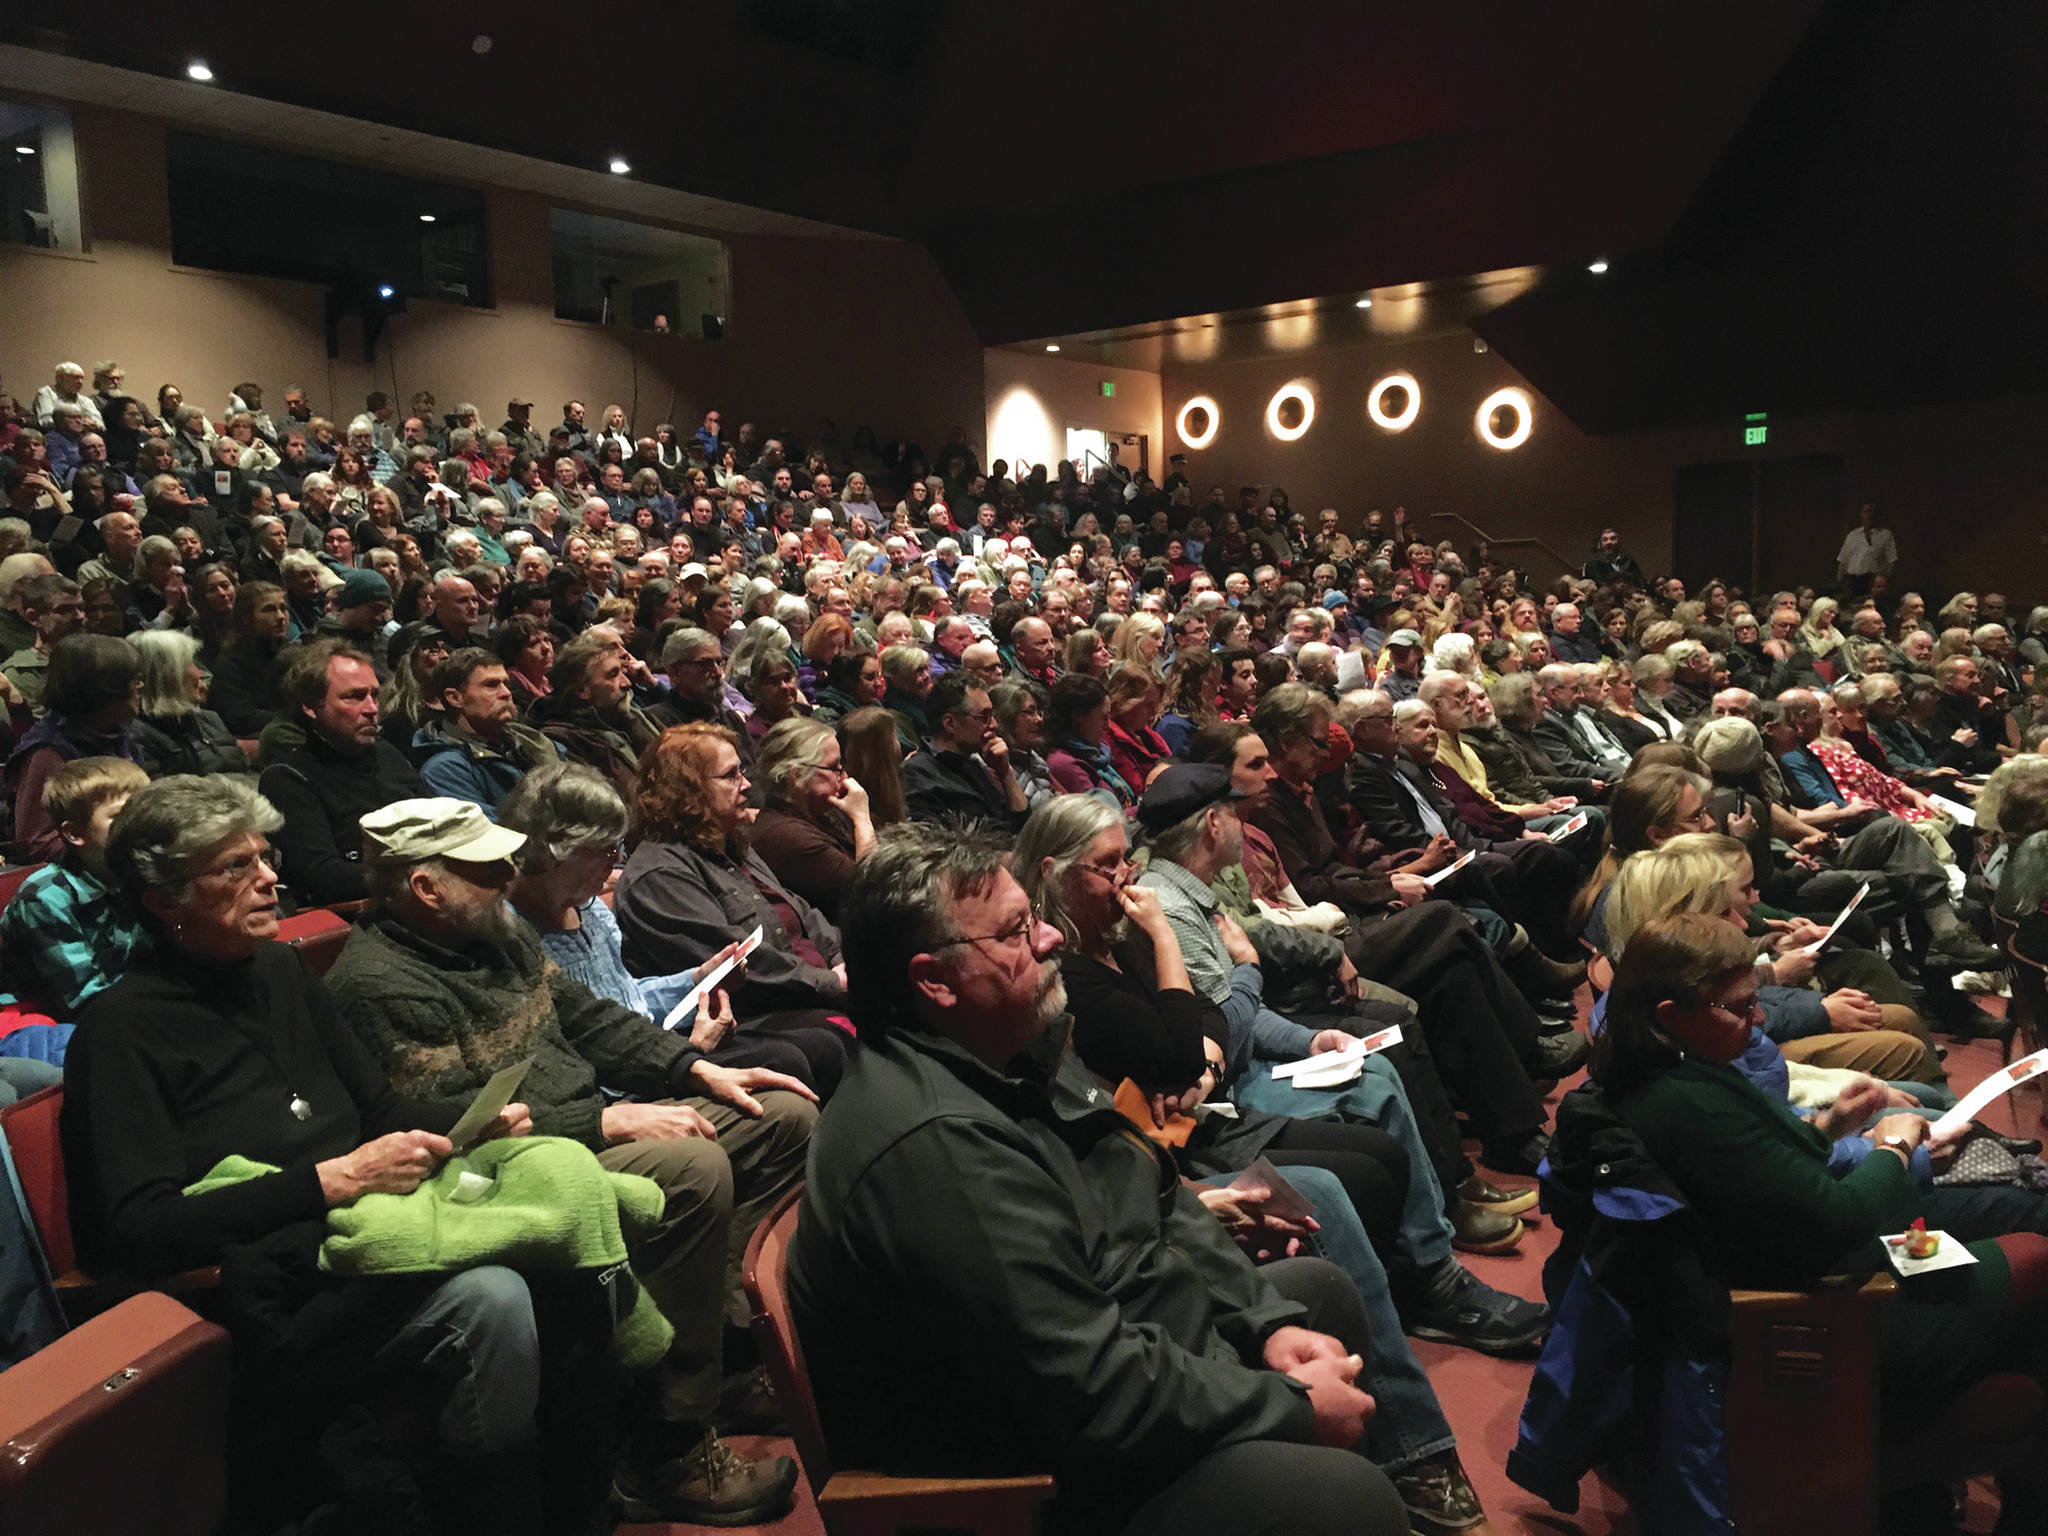 Community members fill the Homer Mariner Theatre as they wait for the memorial for Gary Thomas to begin Sunday, Jan. 19, 2020 at Homer High School in Homer, Alaska. Thomas, a local community volunteer and volunteer firefighter, was killed last week in a water heater explosion. (Photo by Megan Pacer/Homer News)